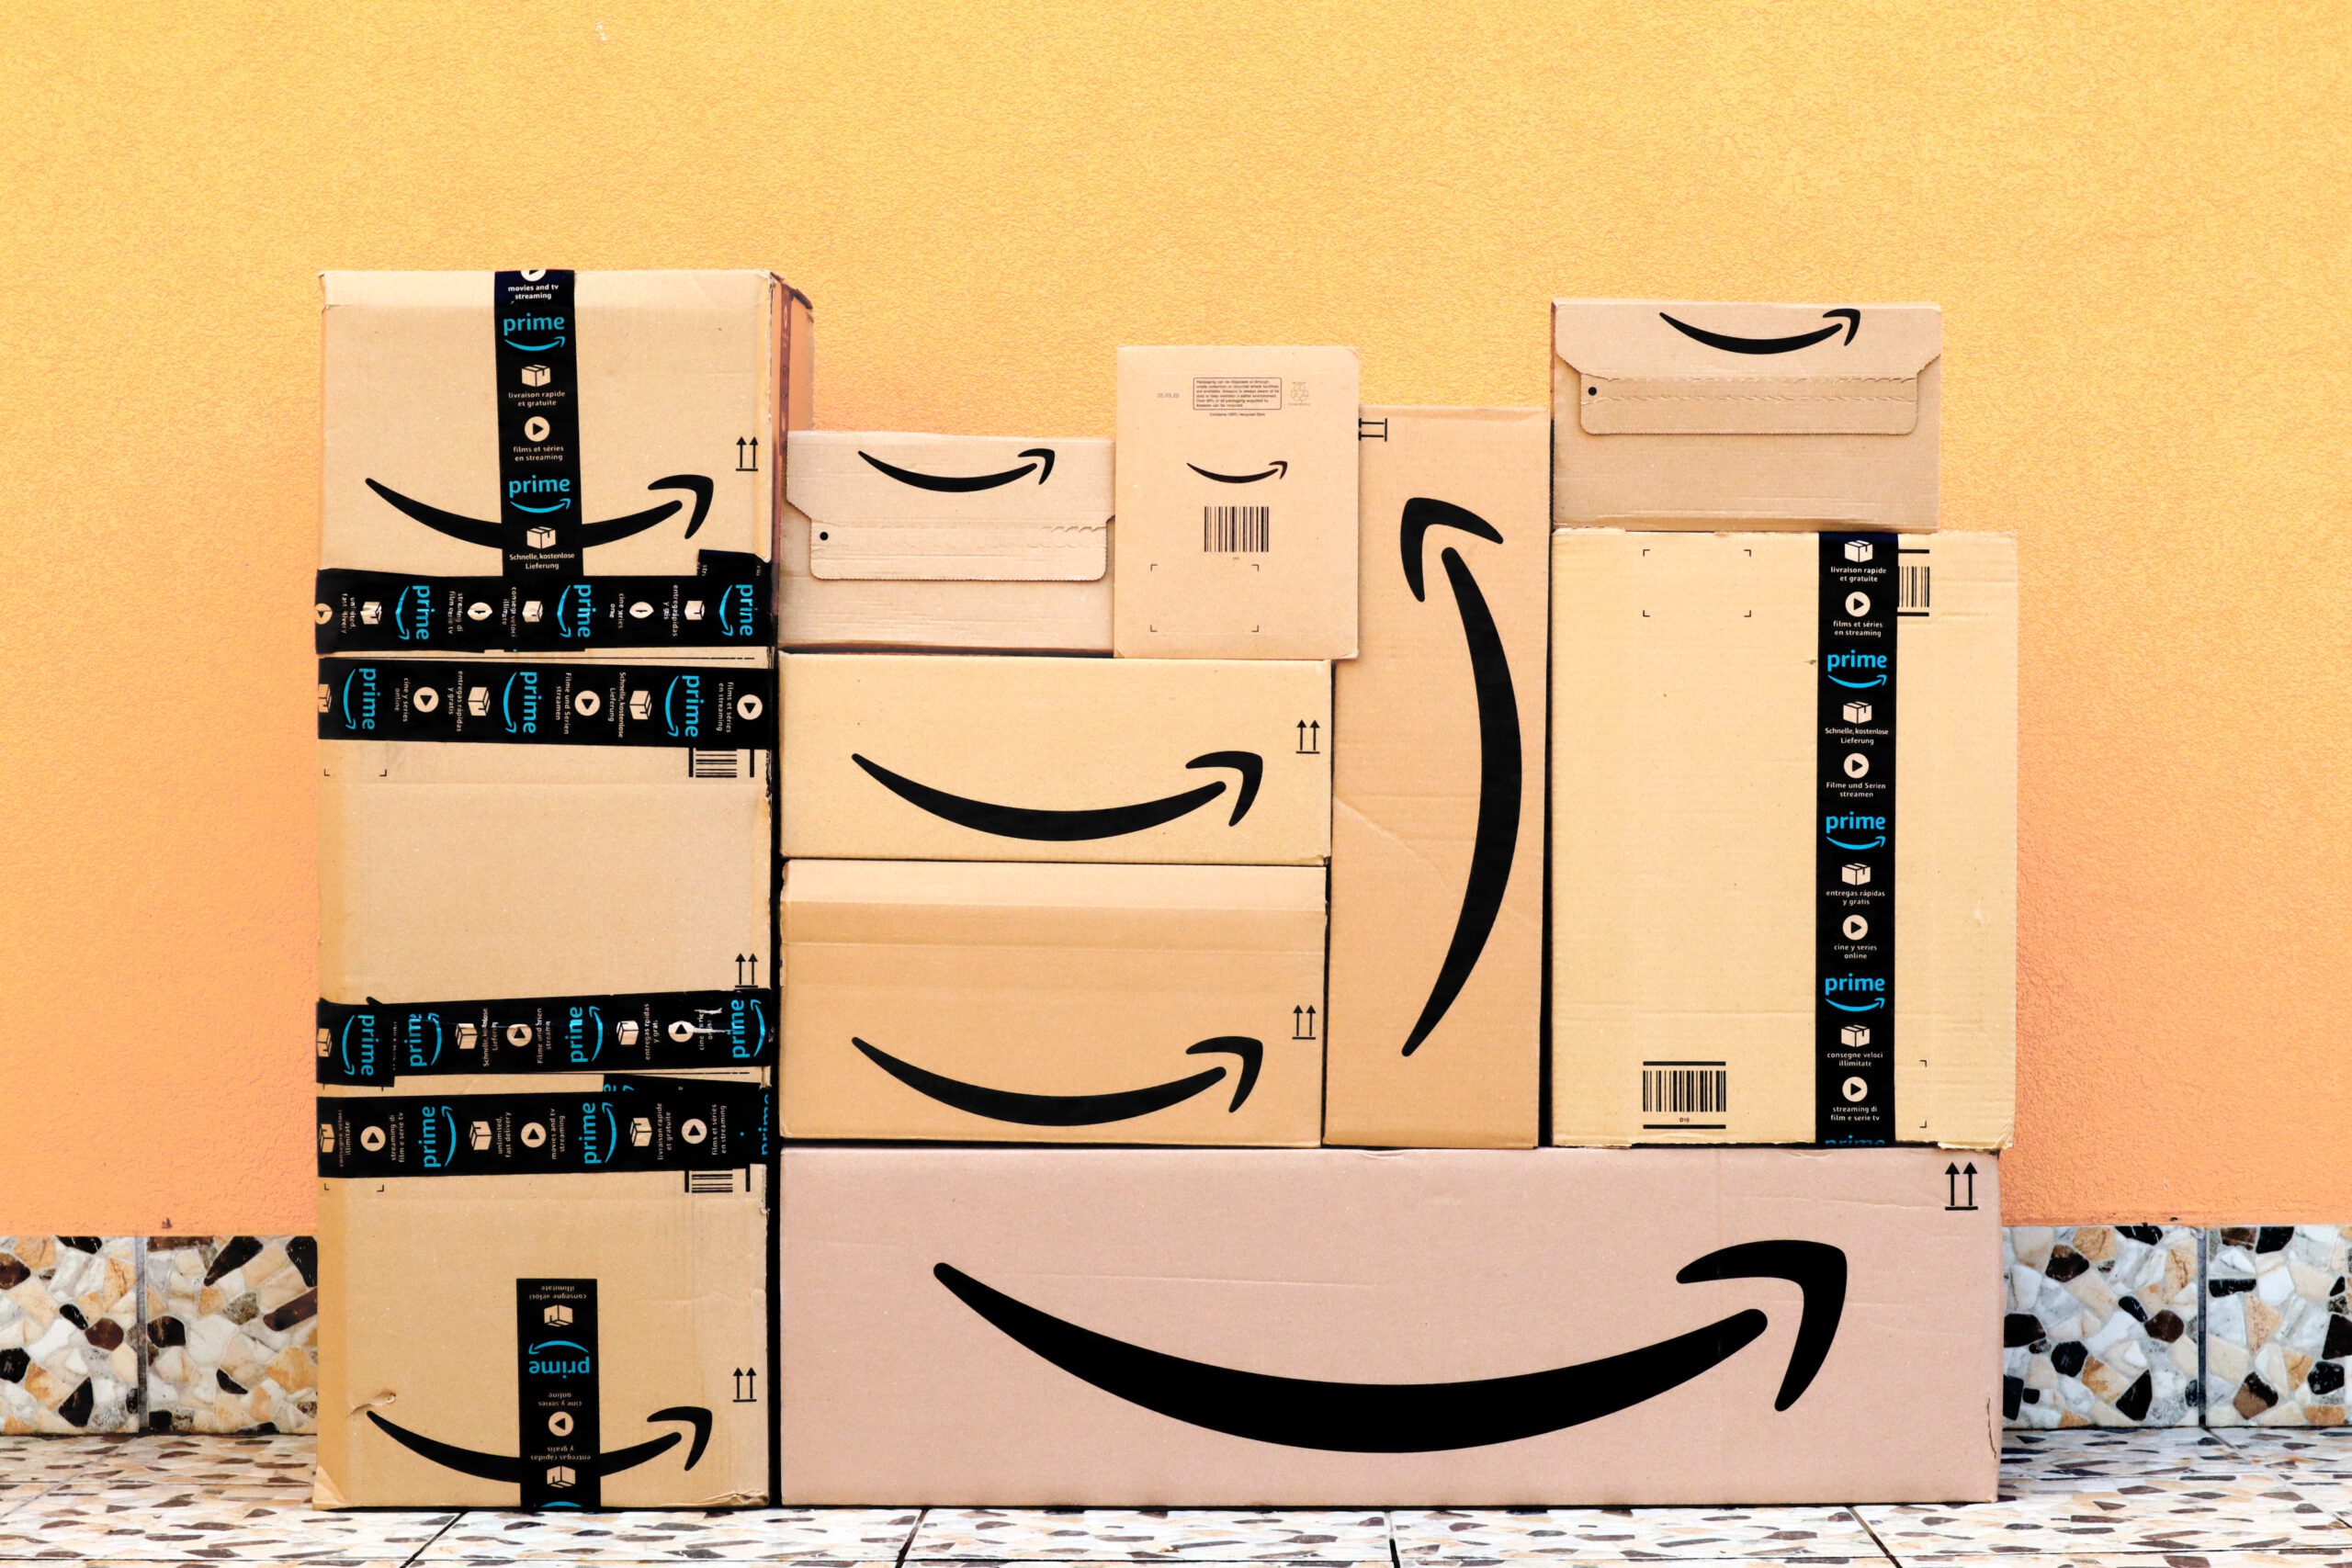 Prime Day 2023: How Much Did Consumers Spend This Year?